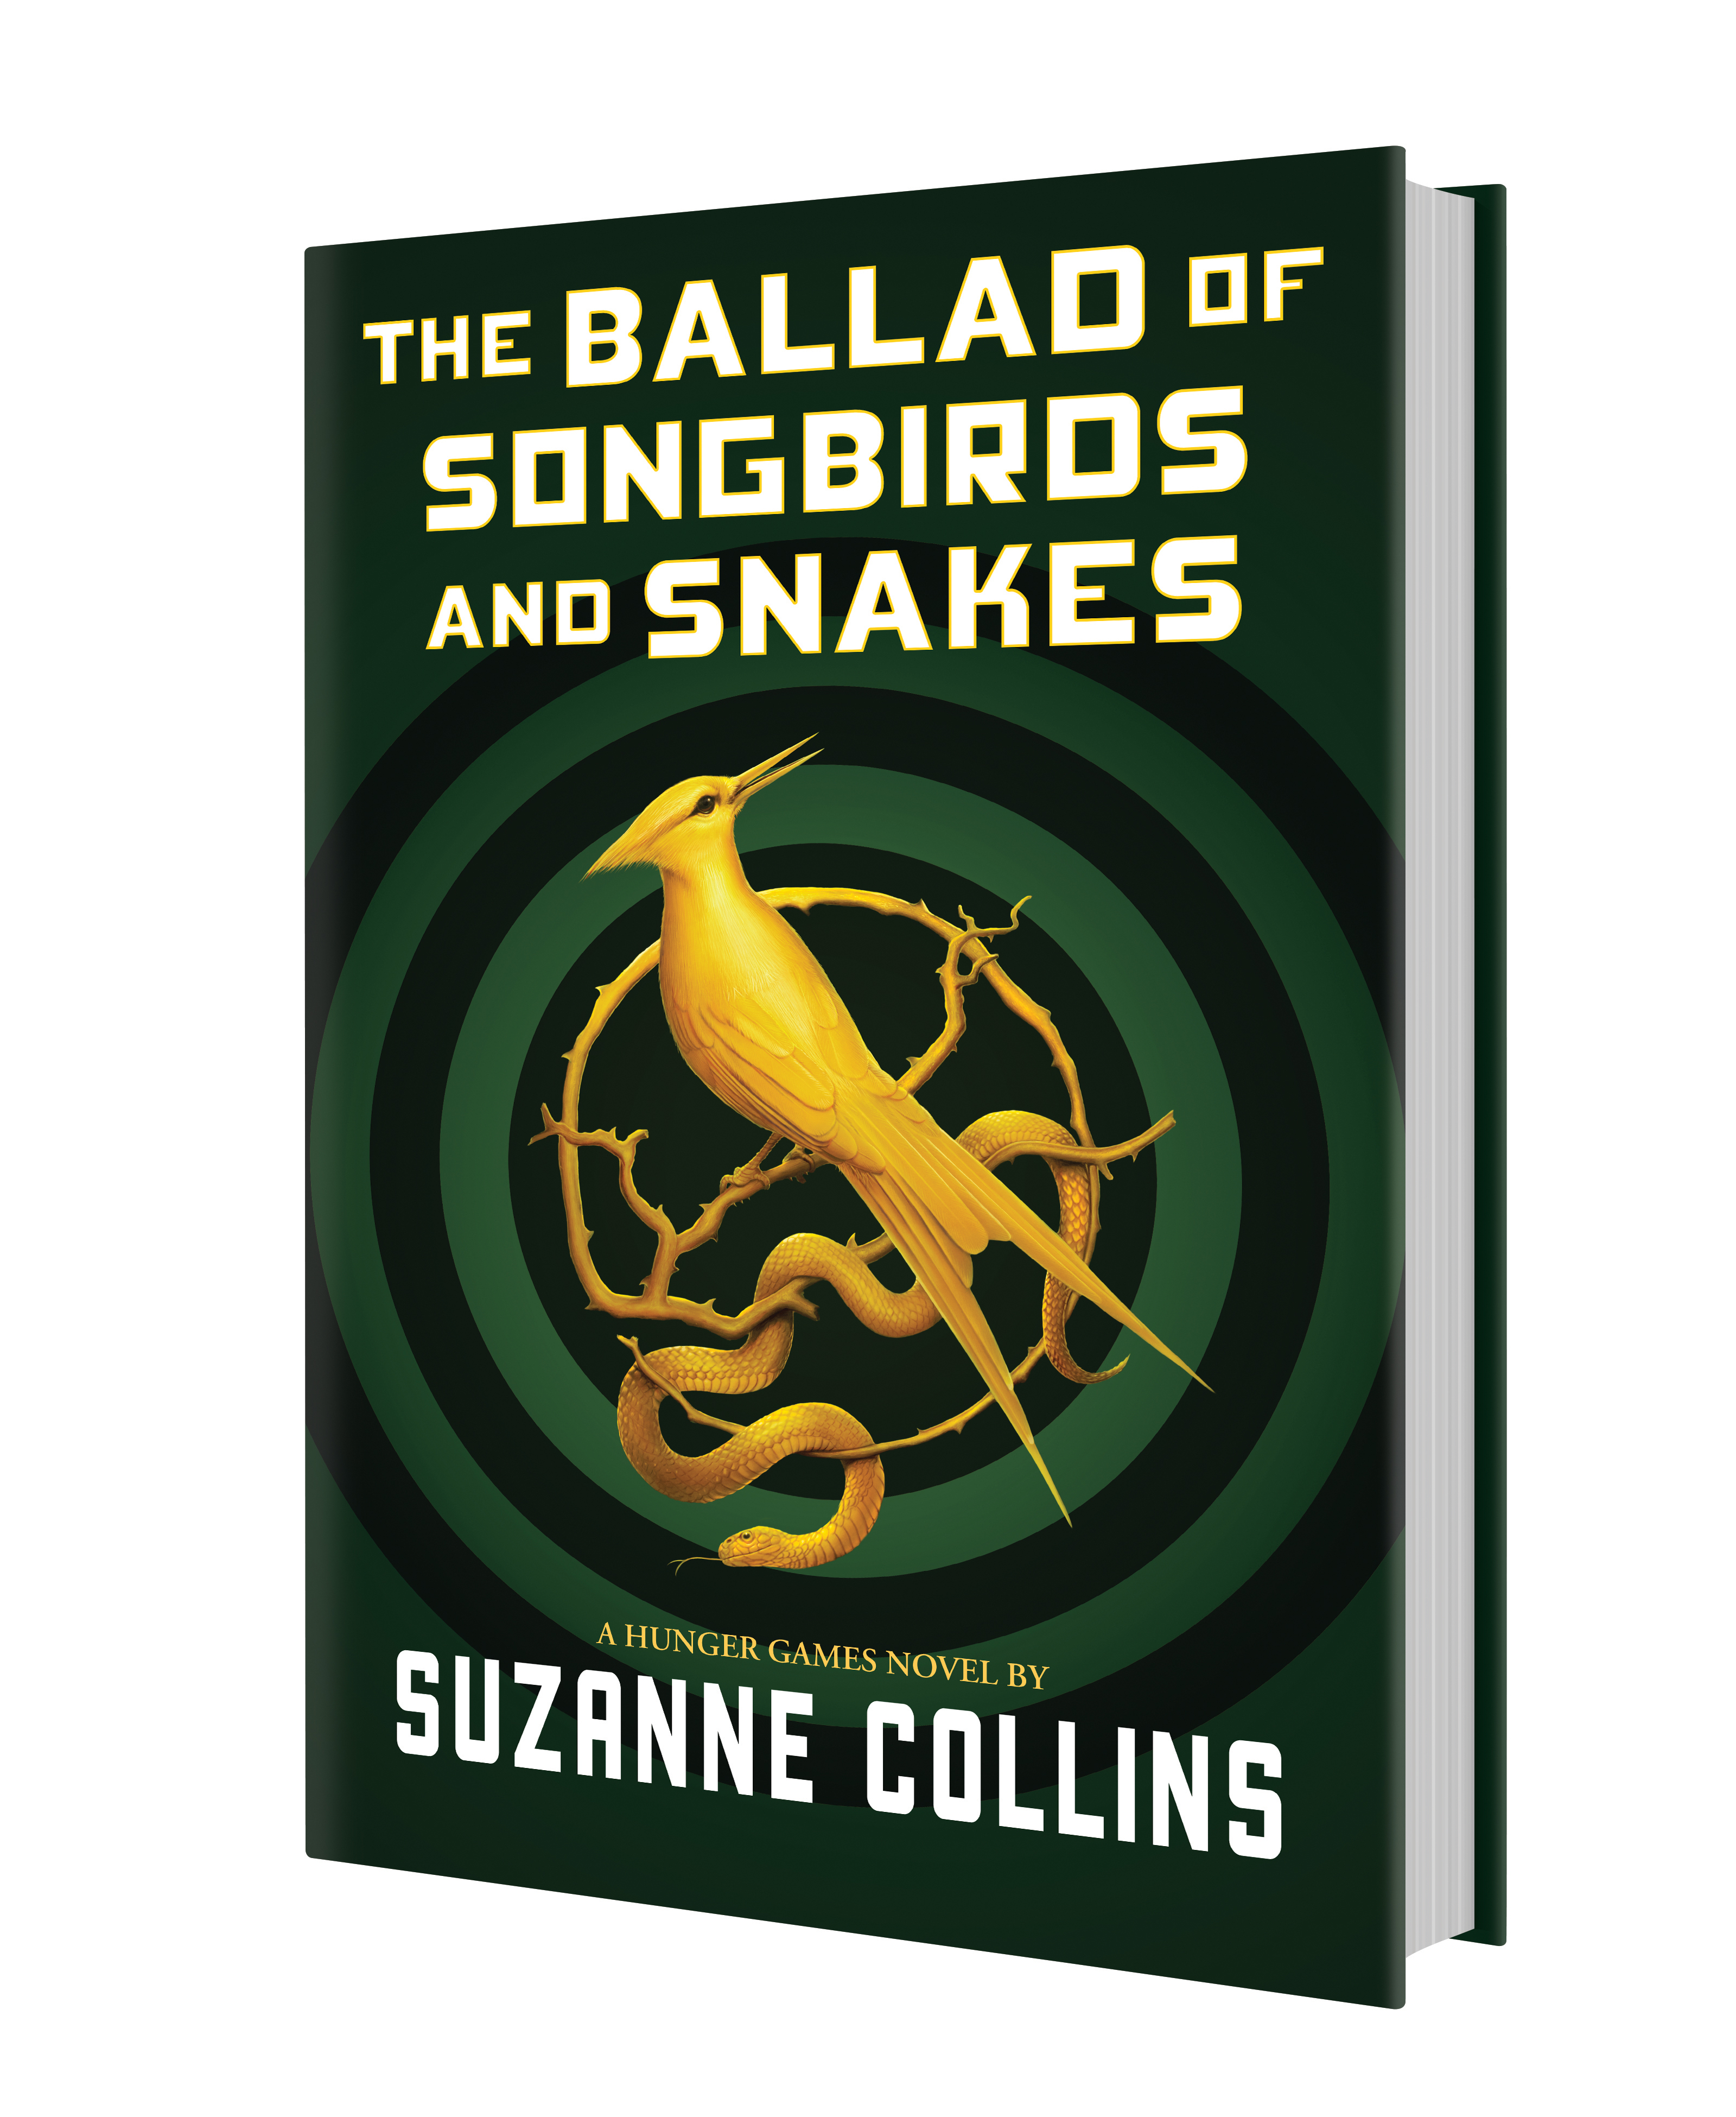 The Hunger Games by Collins, Suzanne